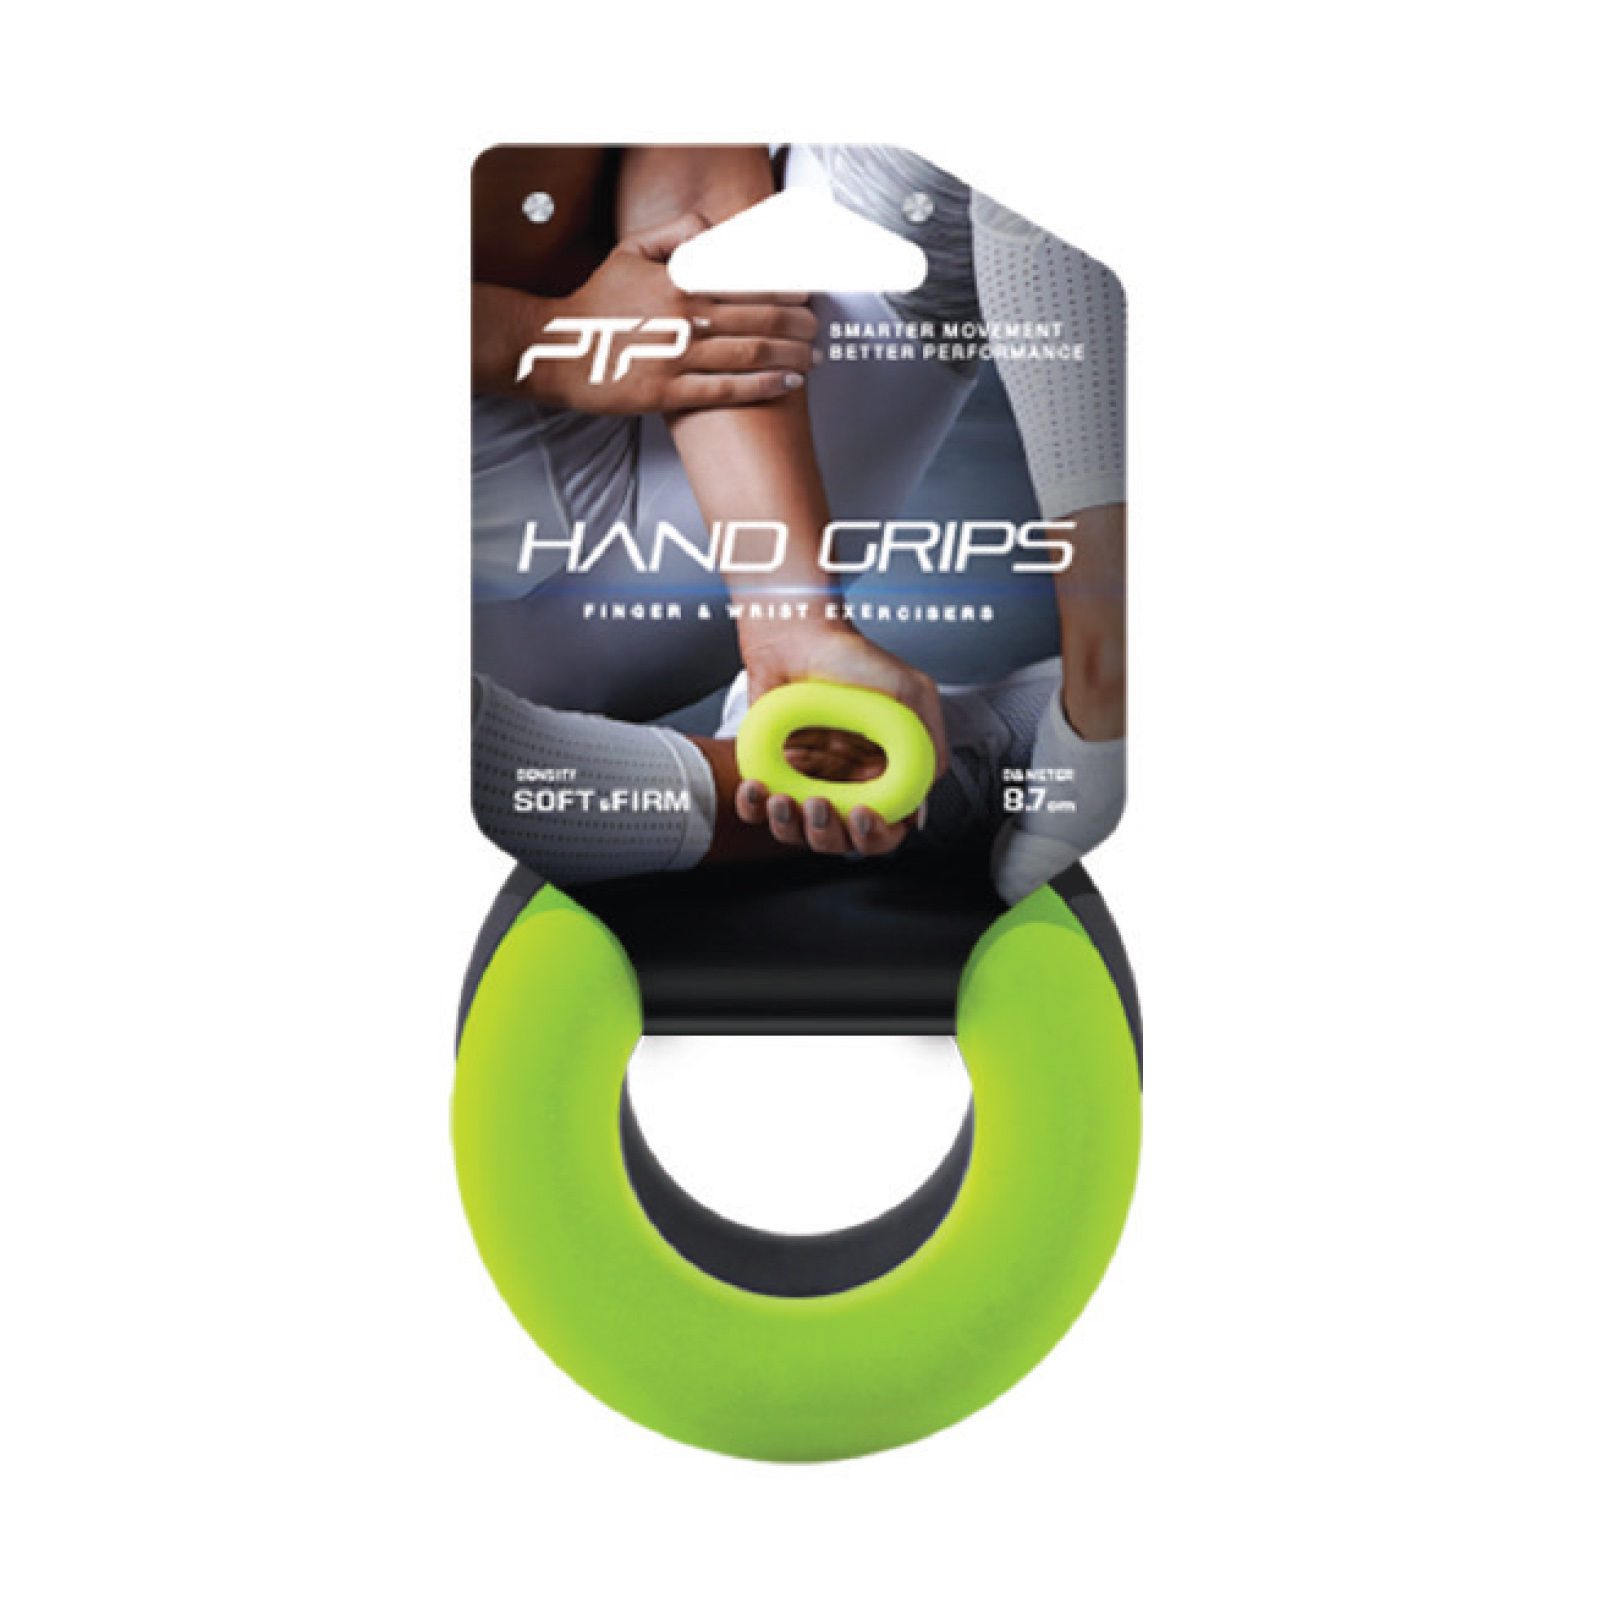 Hand Grips Finger and Wrist Exercisers